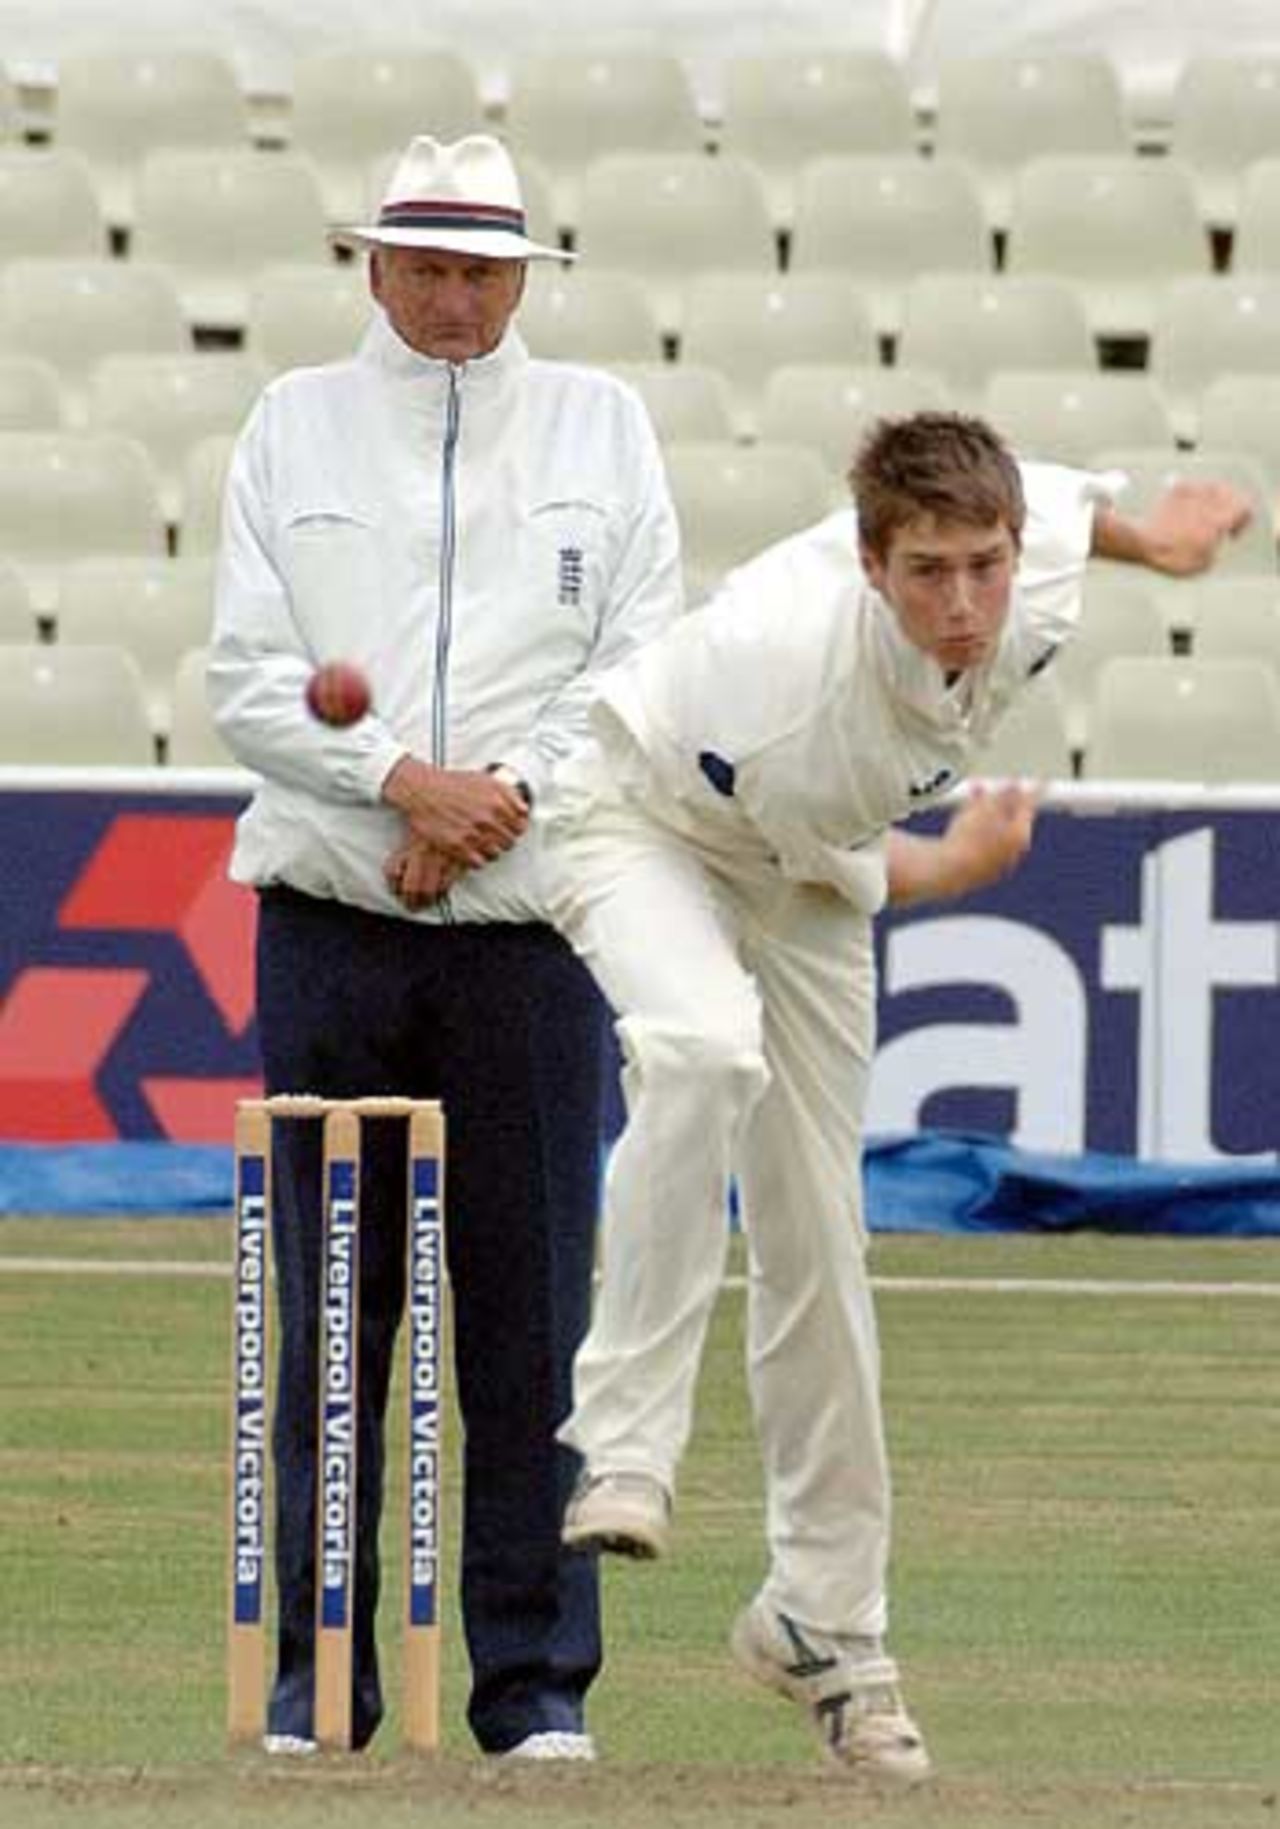 Chris Woakes bowls on his Warwickshire debut as he starts with two wickets in his first spell, Warwickshire v West Indies A, Tour Match, Edgbaston, August 2, 2006